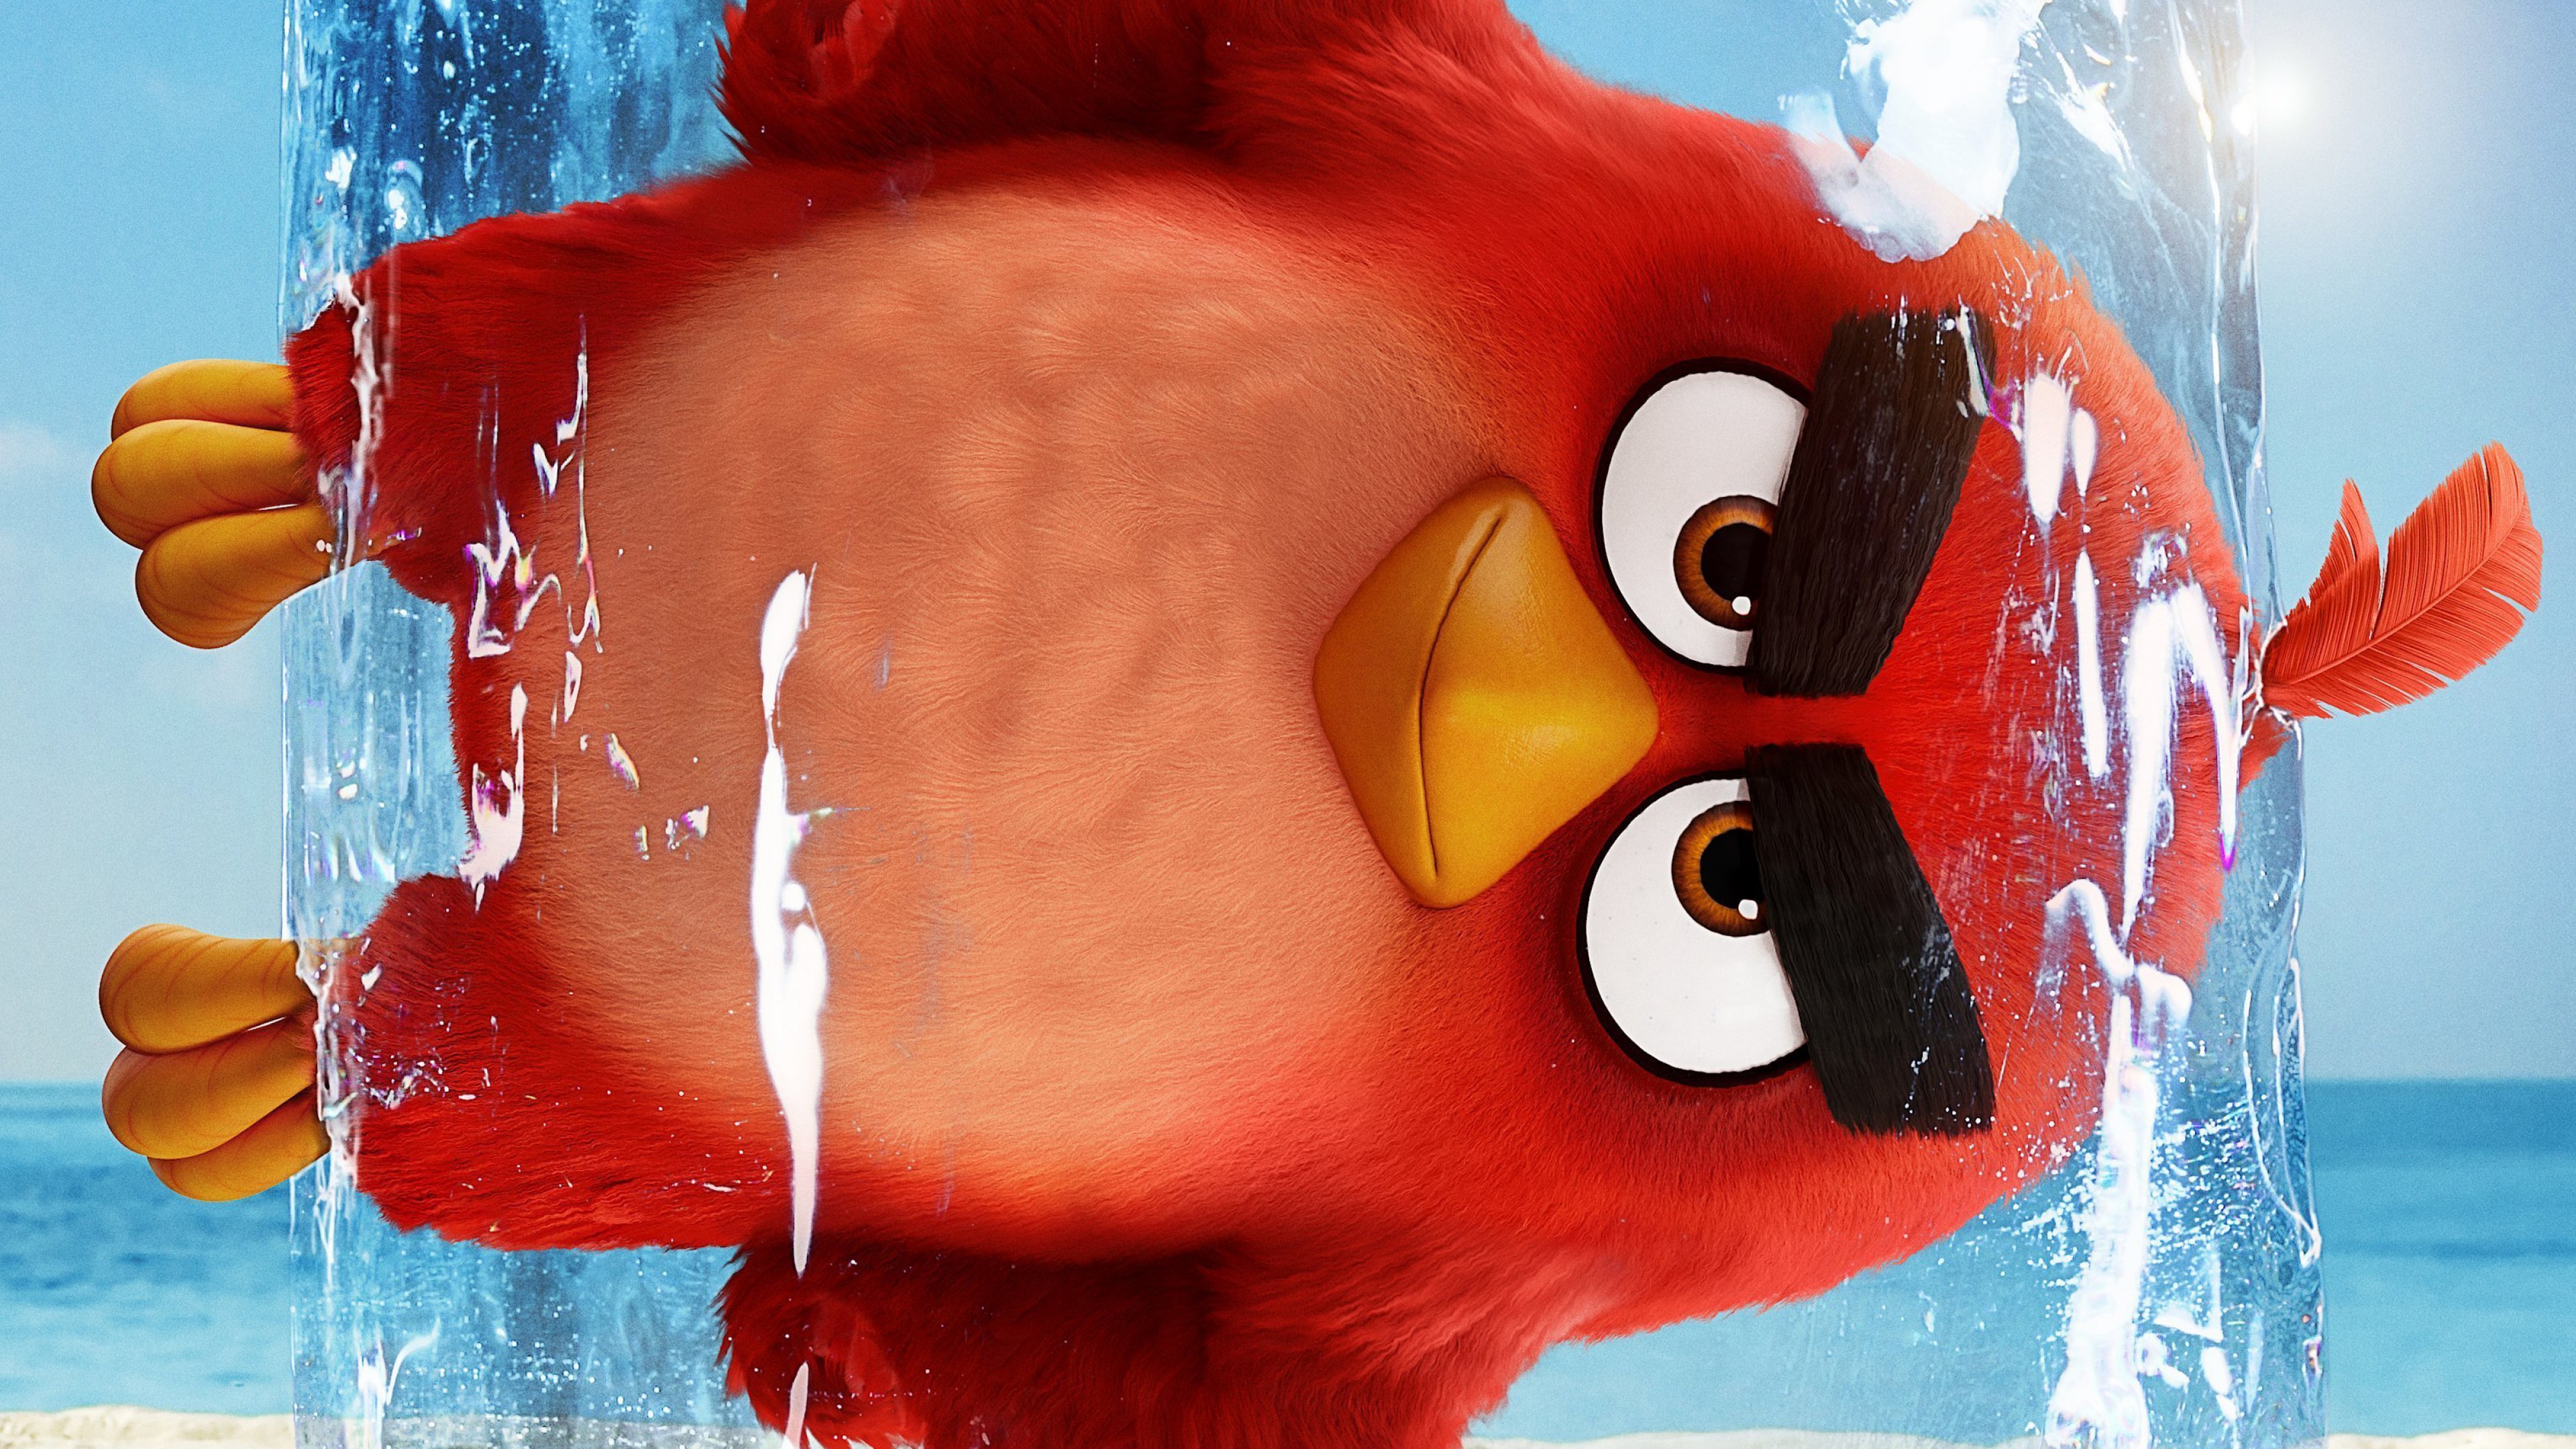 The Angry Birds Movie 2 Wallpaper 4k Ultra HD